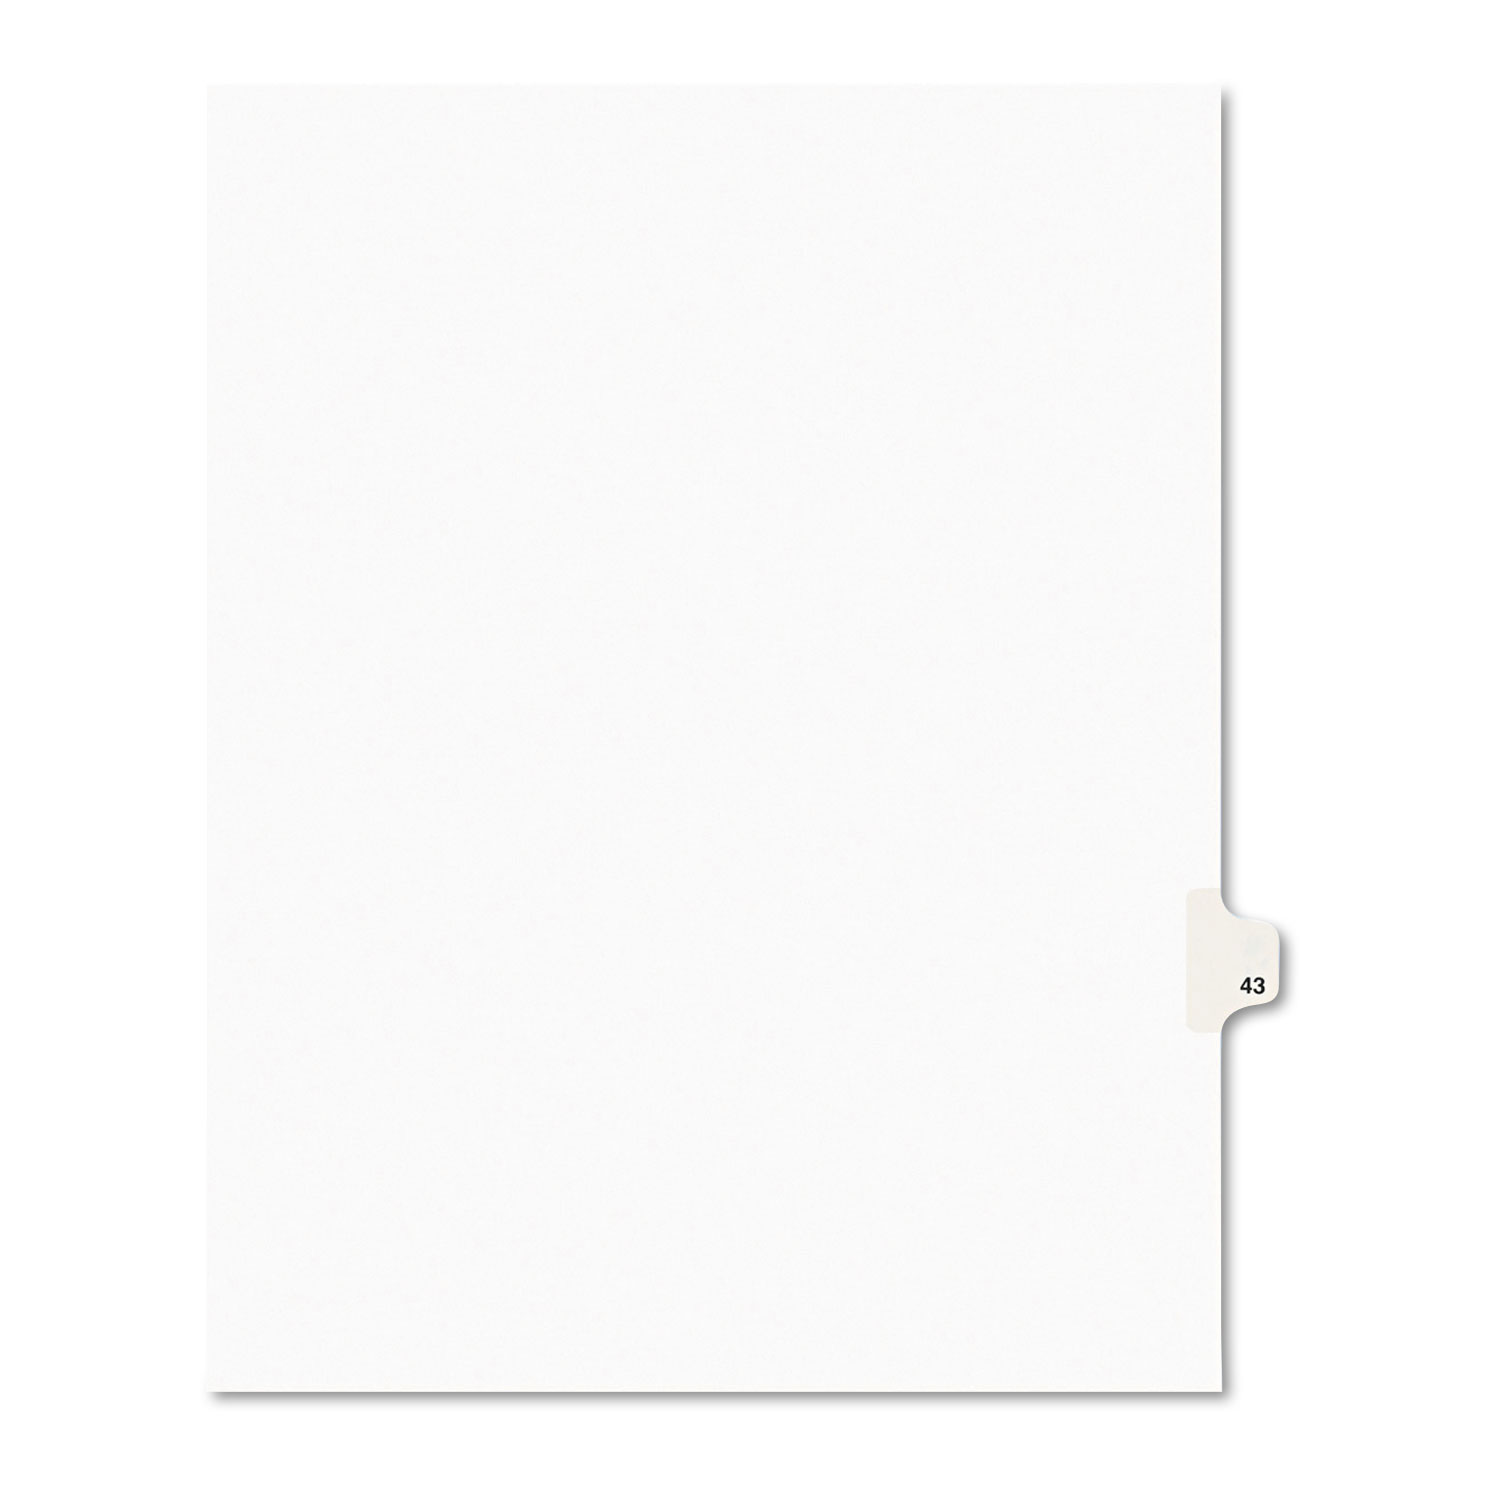  Avery 01043 Preprinted Legal Exhibit Side Tab Index Dividers, Avery Style, 10-Tab, 43, 11 x 8.5, White, 25/Pack (AVE01043) 